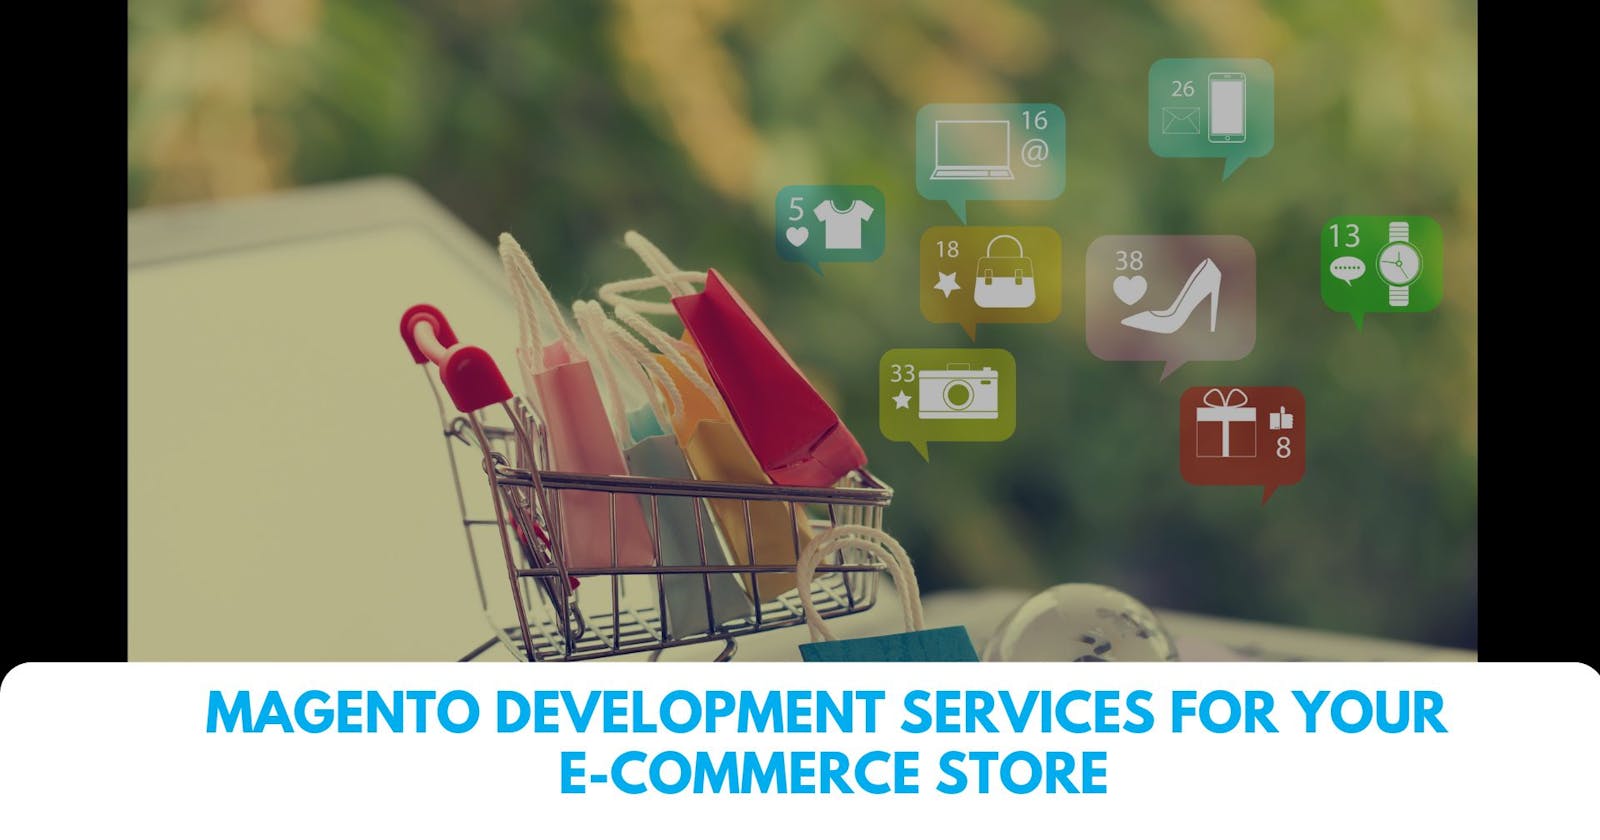 Top 8 Reasons to Choose Magento Development Services For Your E-Commerce Store